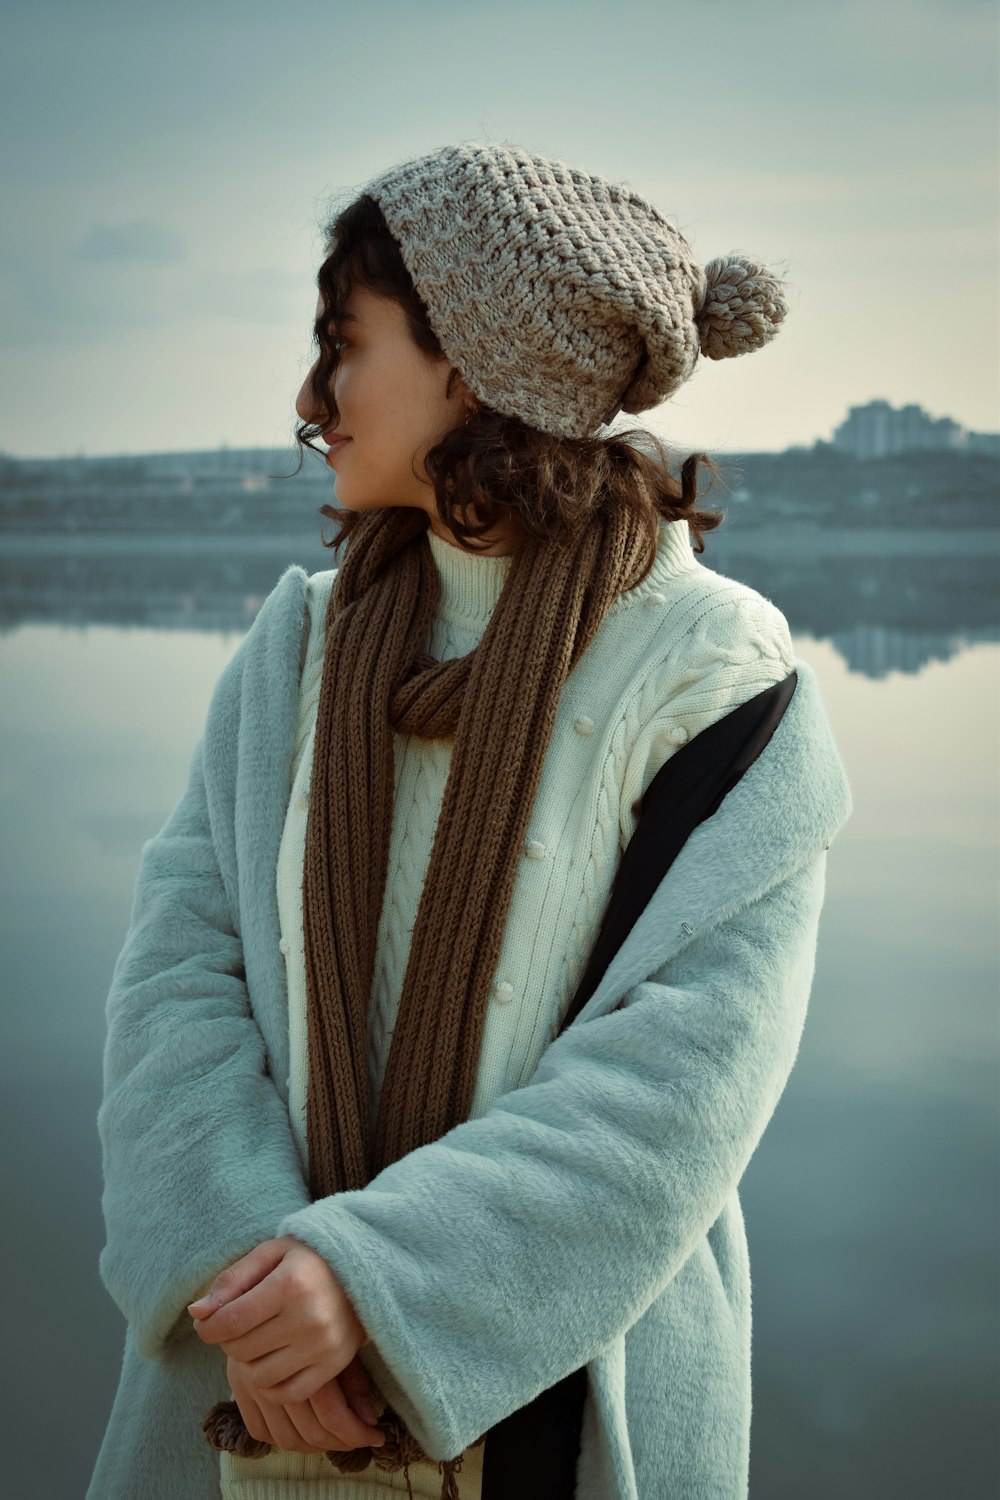 a woman standing next to a body of water wearing a hat and scarf